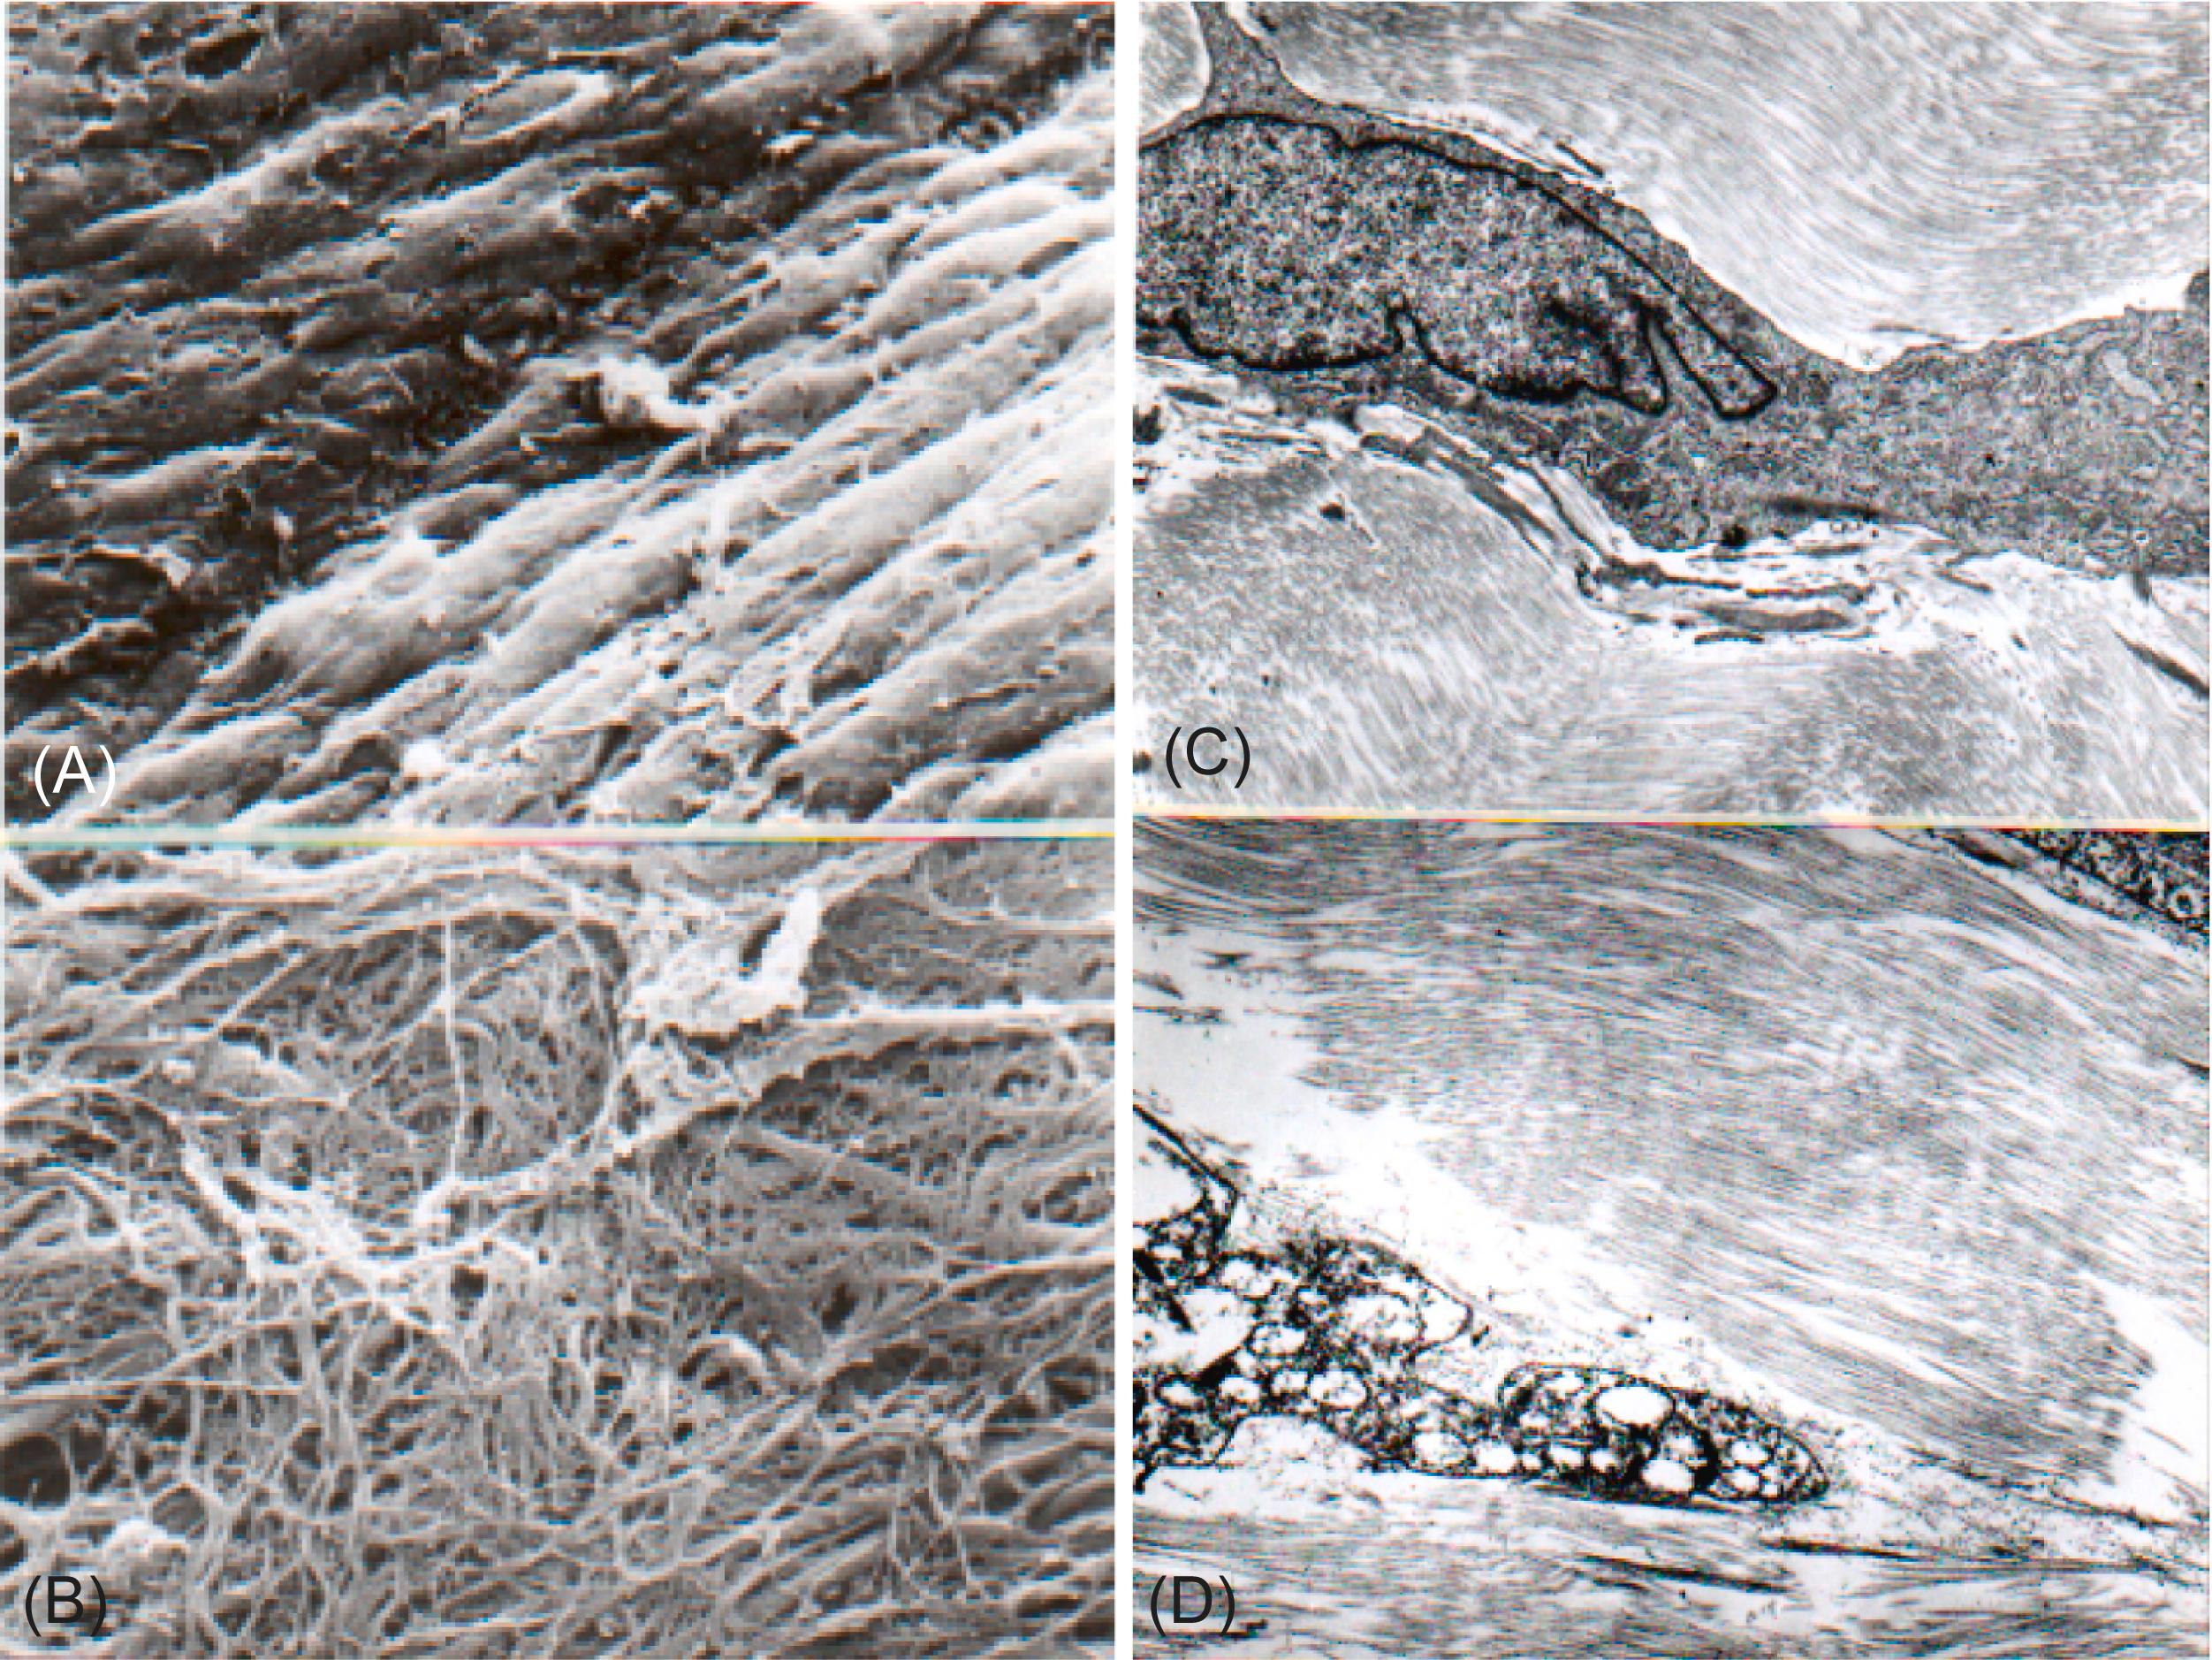 Figure 17.6, Structural alterations induced by preservation and fabrication of a porcine aortic valve into a bioprosthesis. Scanning electron microscopy appearance of the surface of (A) fresh porcine valve and (B) porcine bioprosthesis before implantation. Confluent endothelial layer present in fresh porcine aortic valve is entirely lost in the fabricated valve. A rough, fibrillar basement membrane forms the blood-contacting surface of a commercially produced valve shown in (B). (C and D) Transmission electron microscopy of deep portions of valve illustrating degrees of cellular preservation and collagen waviness. (C) Freshly fixed porcine aortic valve, with morphologically normal cell, wavy collagen, and close apposition of cell to fibrillar and amorphous extracellular matrix. Fabricated valve (high-pressure-fixed) has cellular autolysis and empty space between cells and collagen. Moreover, the collagen is flat in the high-pressure-fixed valve illustrated in (D) but wavy in the fresh aortic valve shown in (C). (C and D) 8000×.